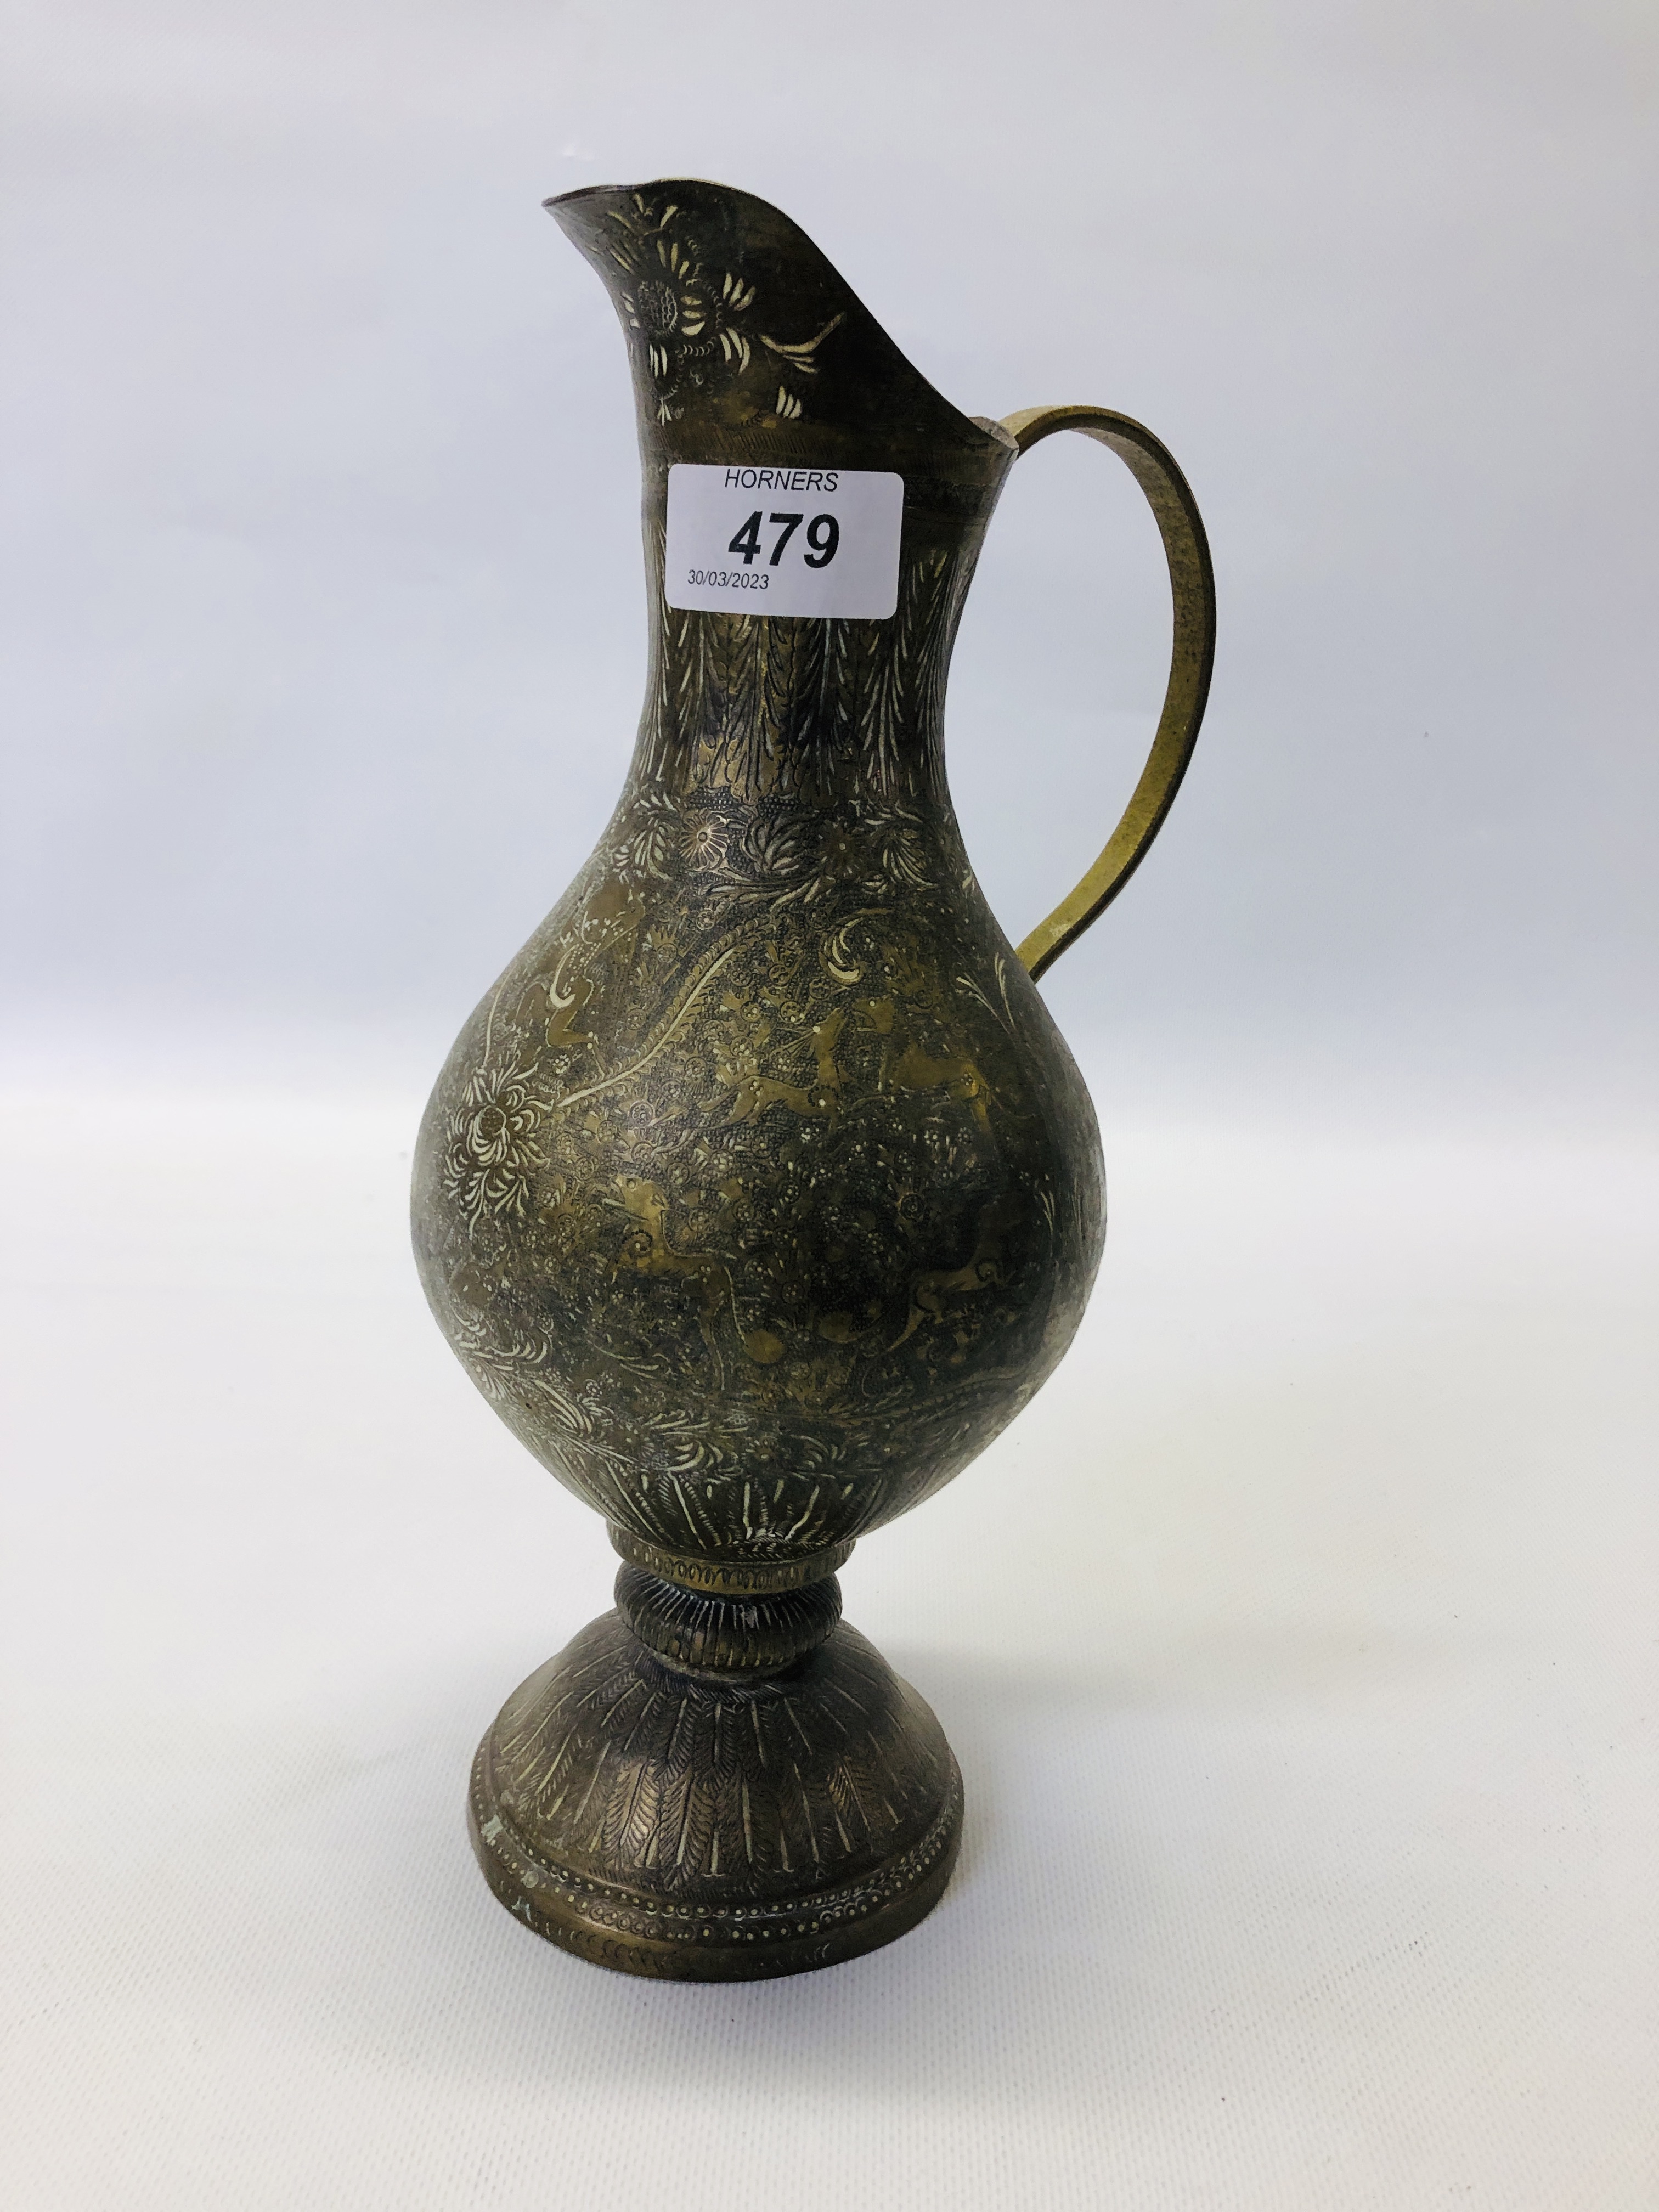 A VINTAGE MIDDLE EASTERN BRASS EWER ALONG WITH AN ELABORATE MIDDLE EASTERN BRASS COFFEE POT. - Image 11 of 21